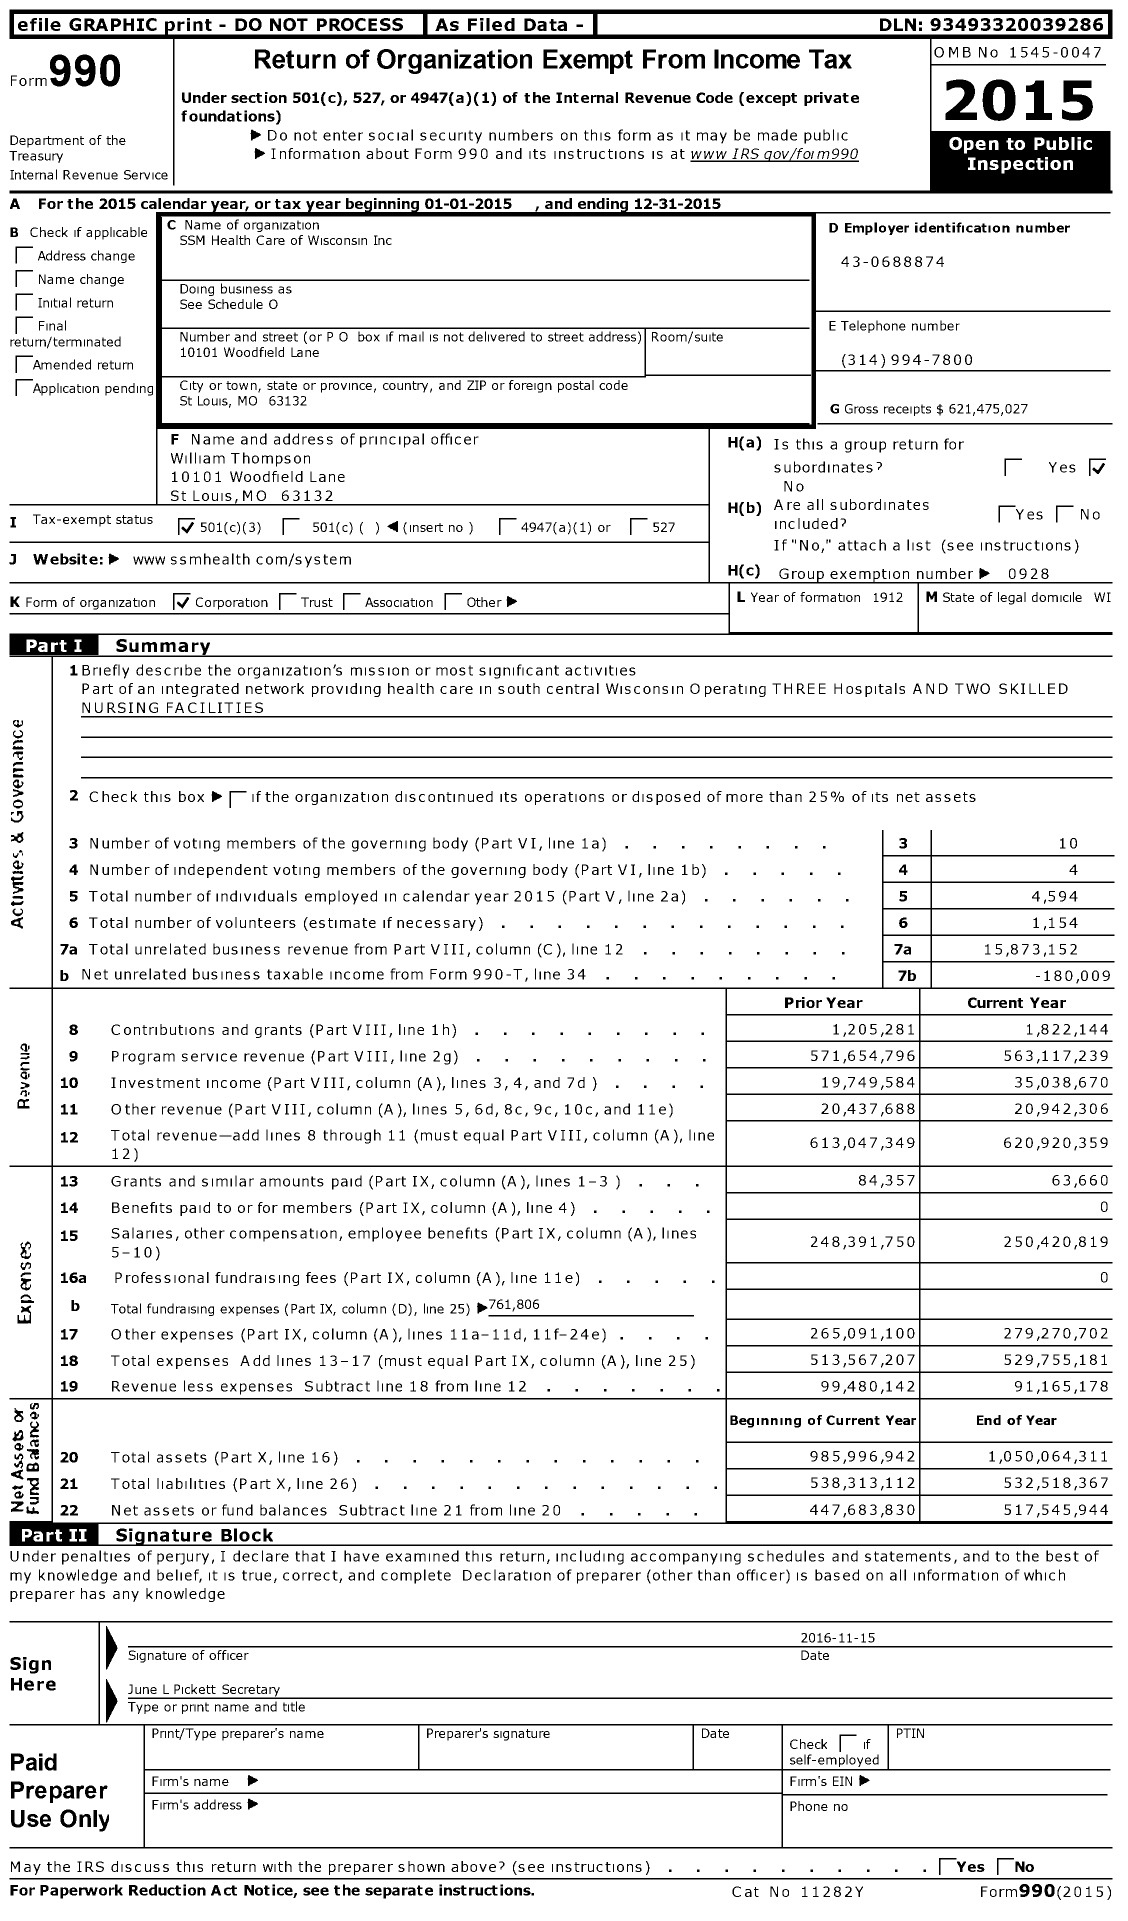 Image of first page of 2015 Form 990 for SSM Health Care of Wisconsin